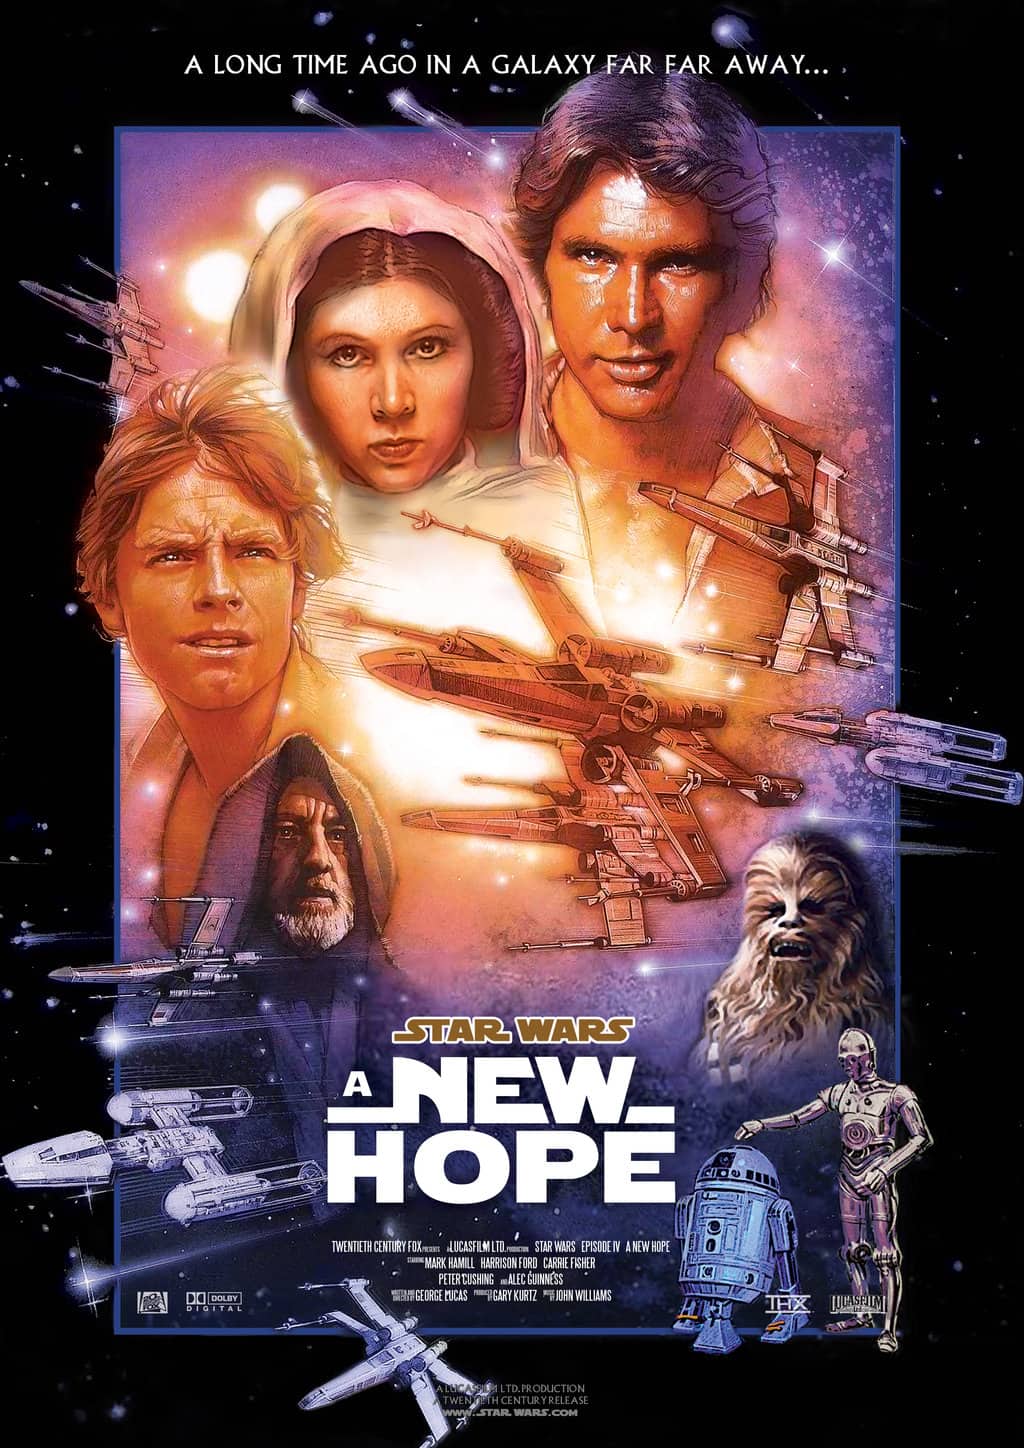 「STAR WARS EPISODE IV A NEW HOPE」の画像検索結果